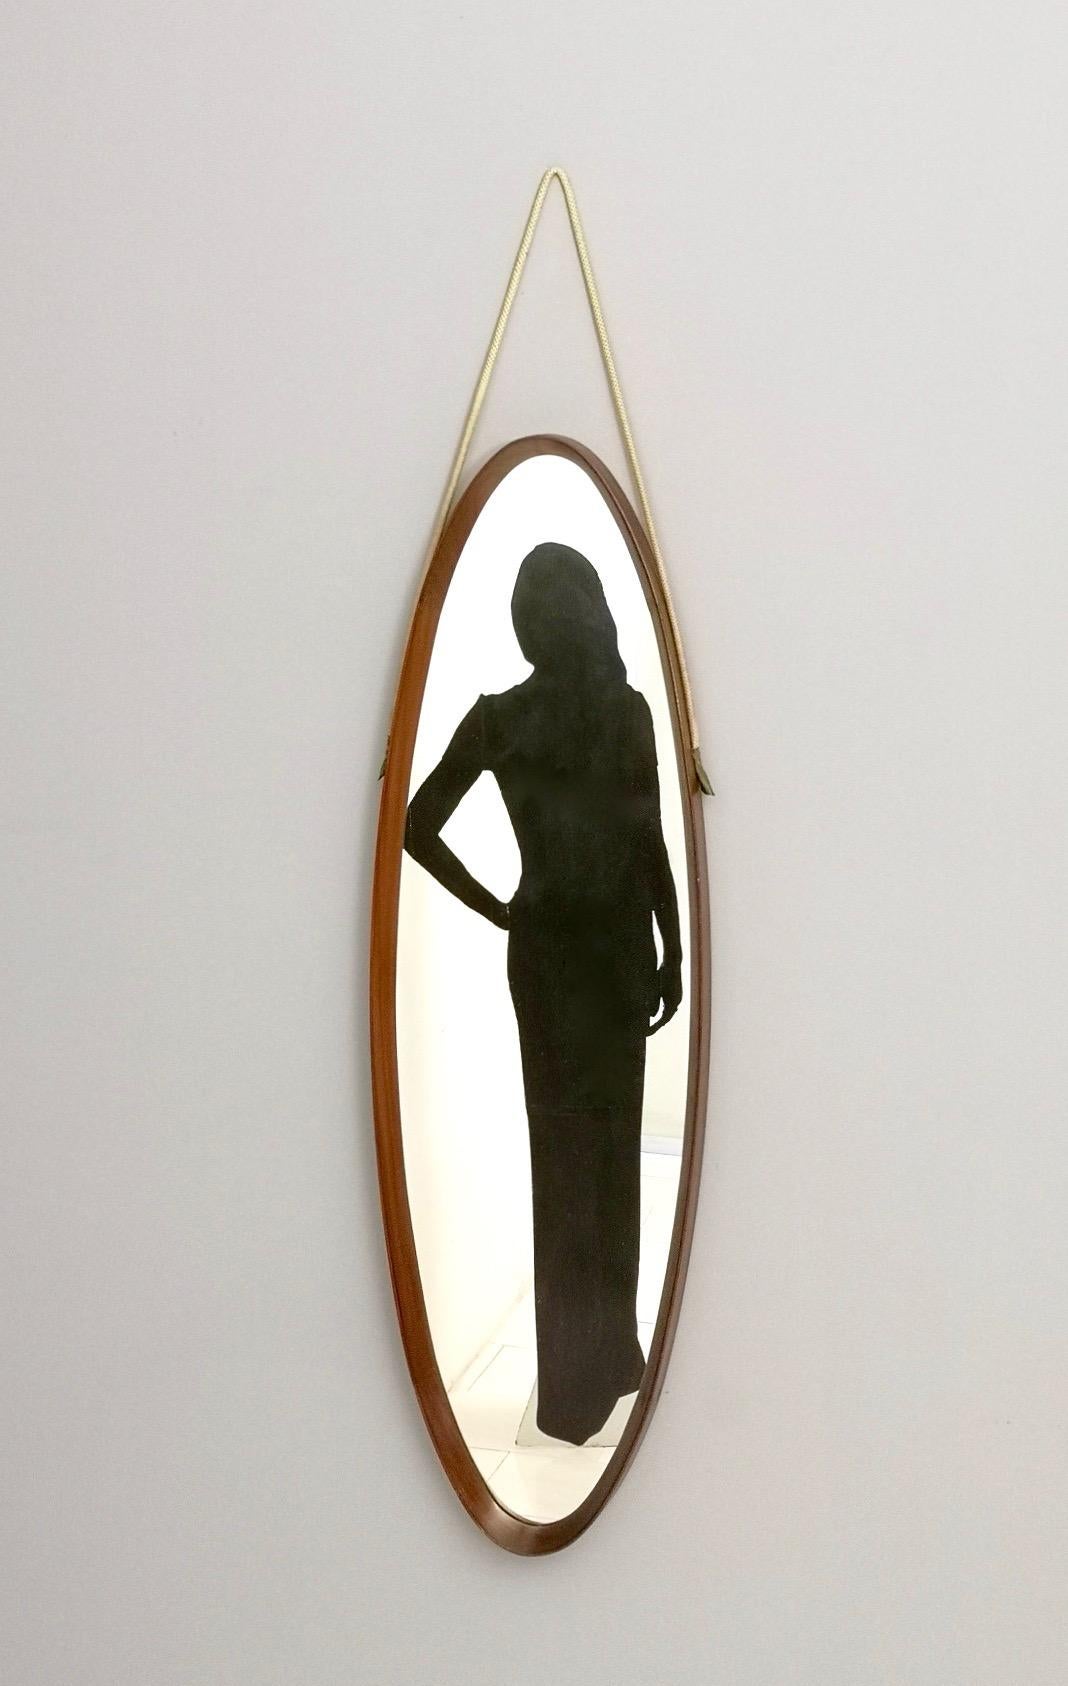 Italian Oval Wall Mirror with a Solid Mahogany Frame and a Rope Hanger, Italy, 1960s